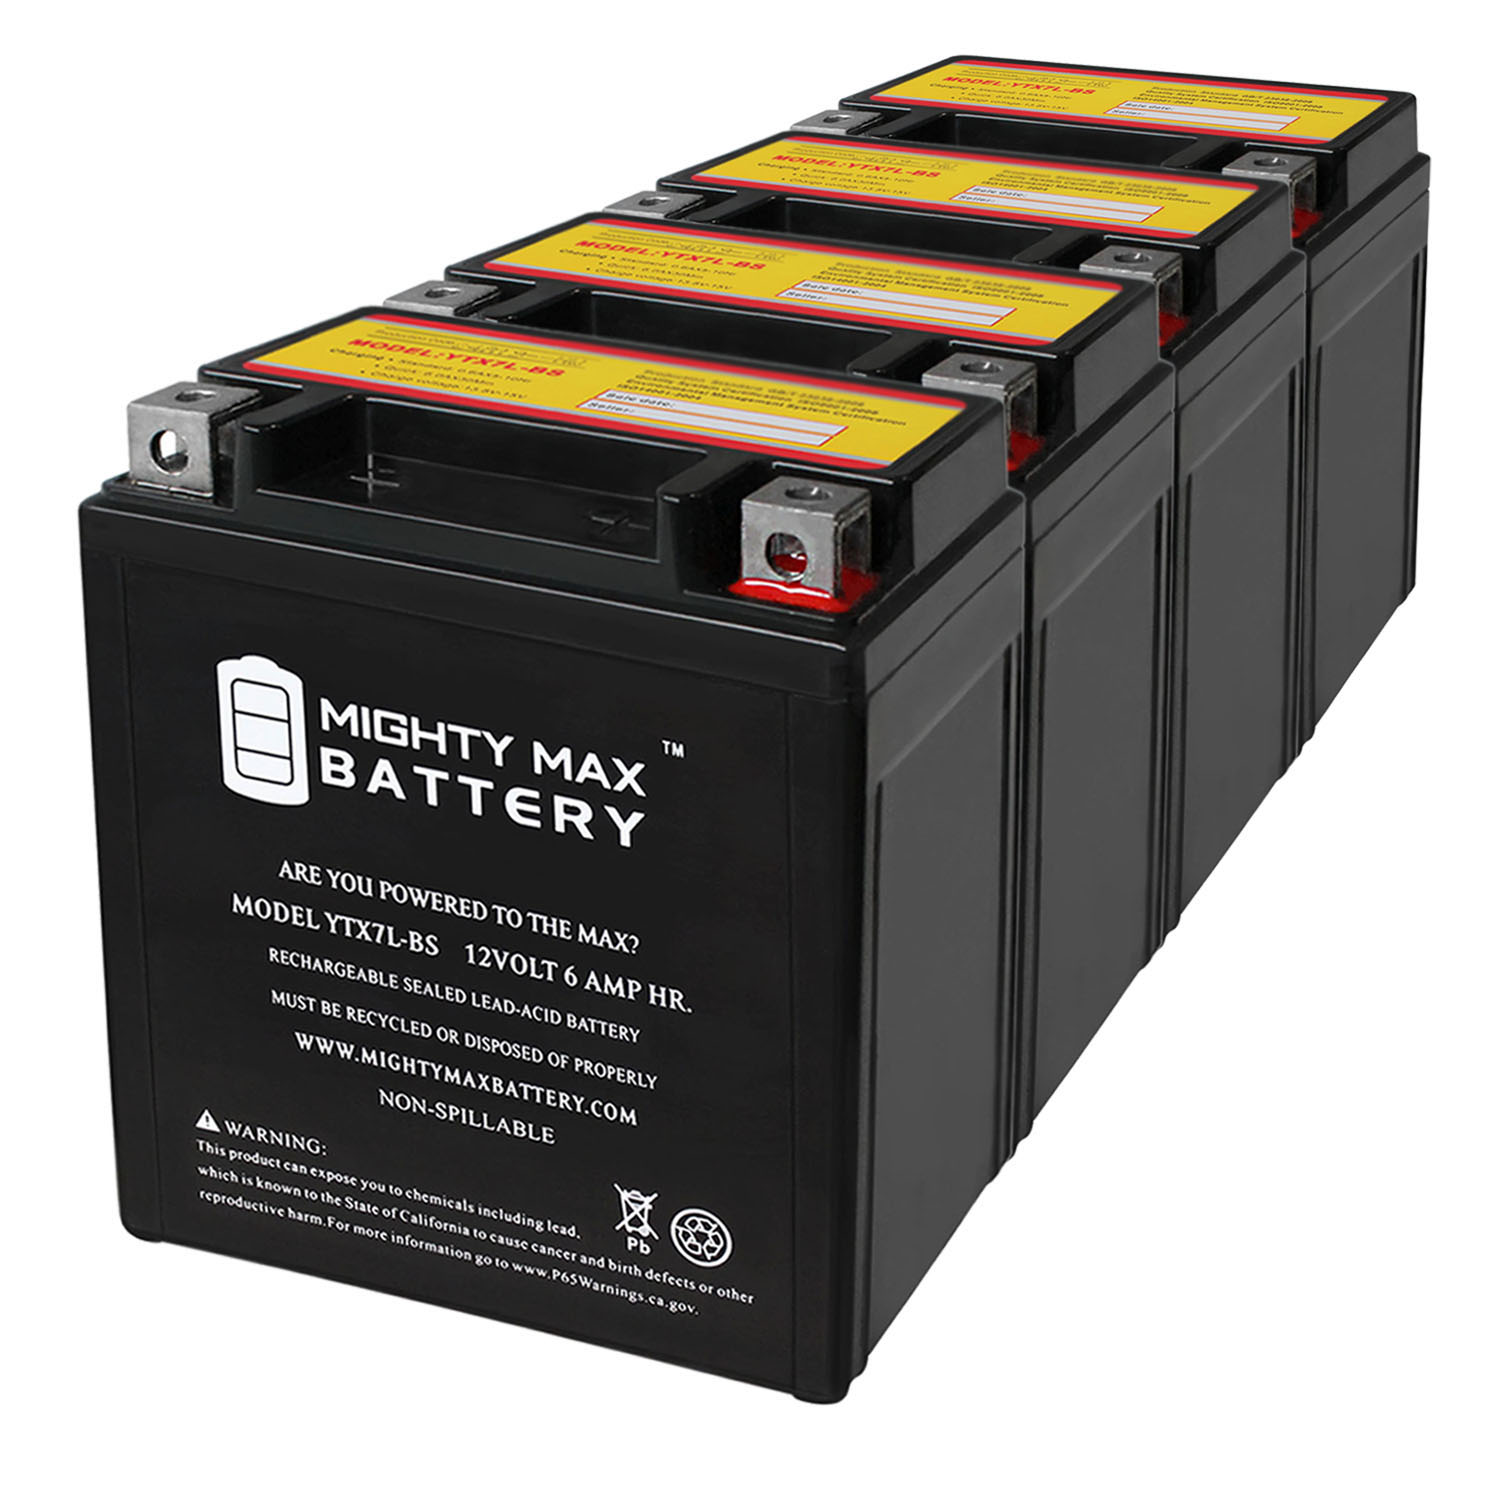 YTX7L-BS 12V 6Ah Replacement Battery Compatible with UltraMax TTX7L-BS - 4 Pack